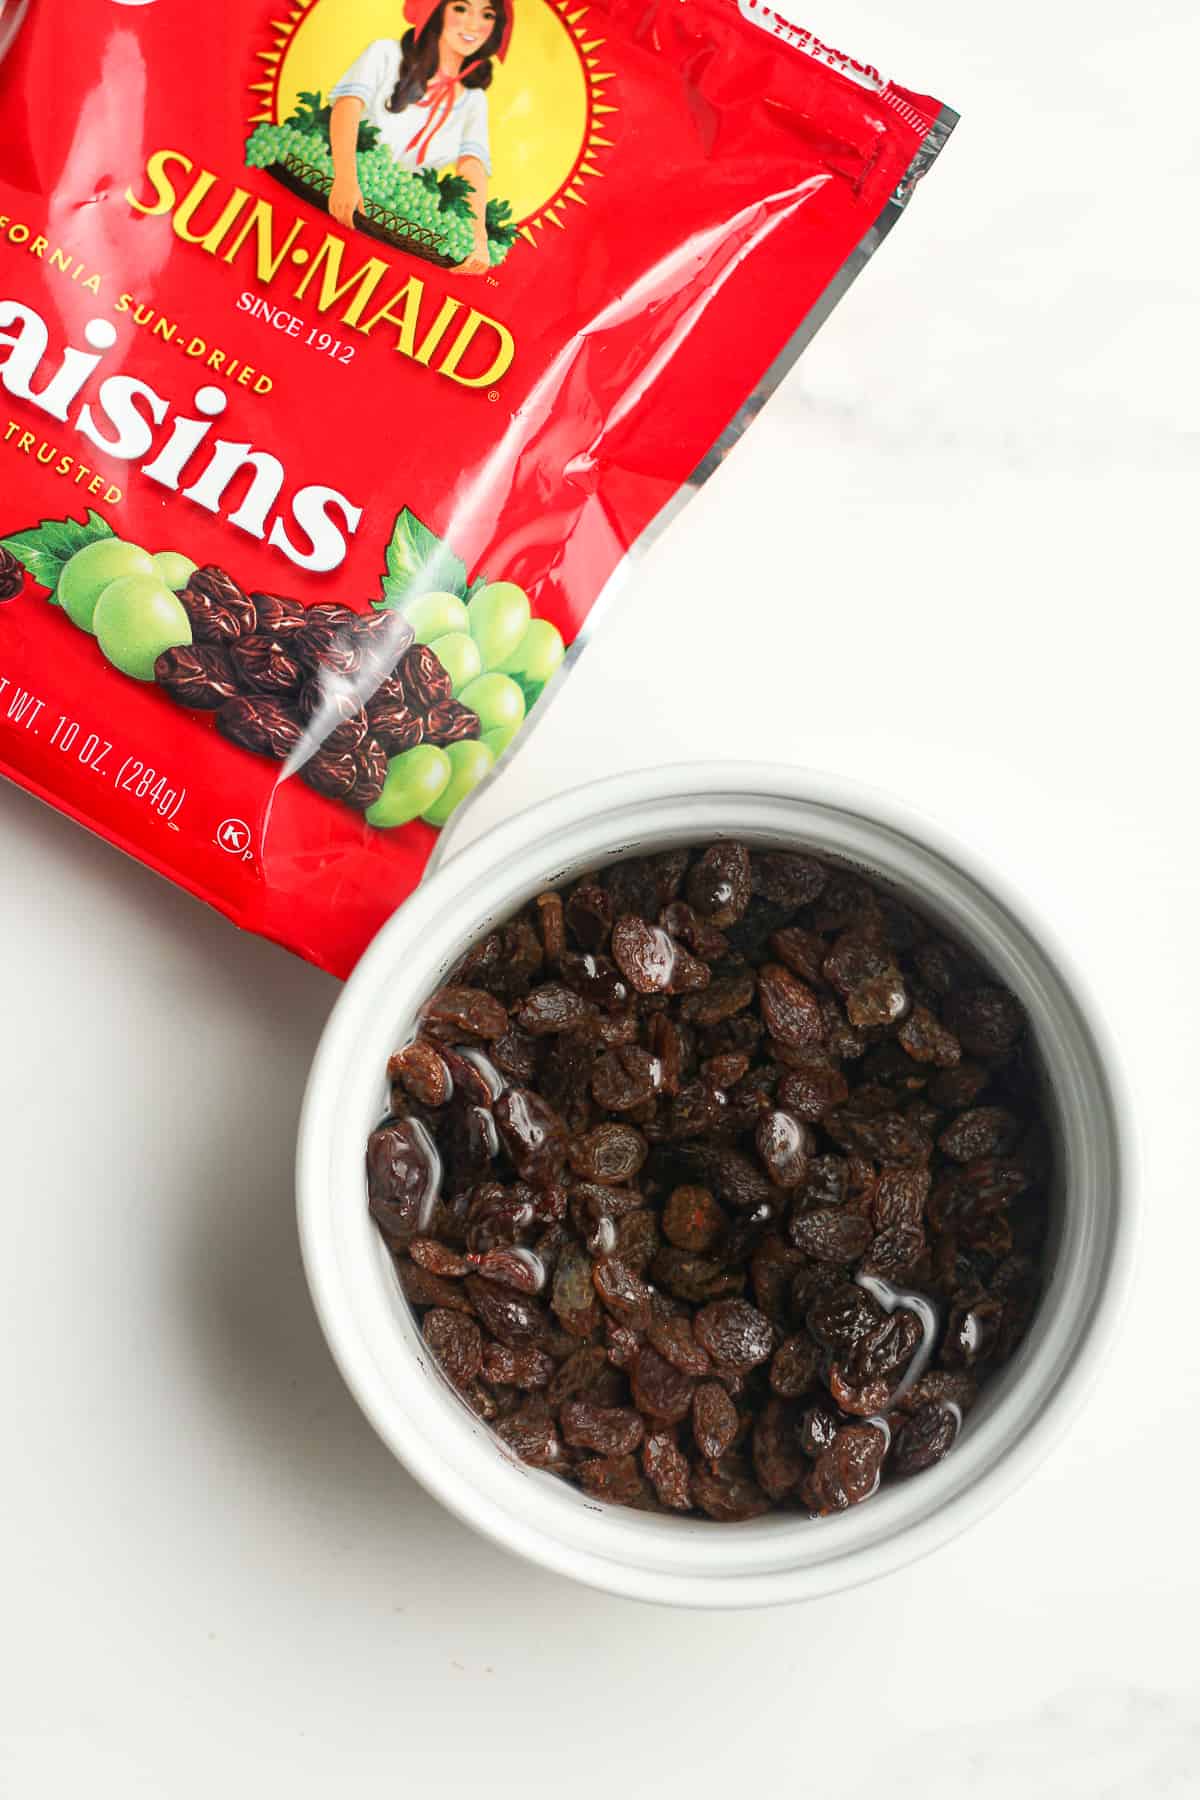 A bowl of the soaked raisins with a package next to it.